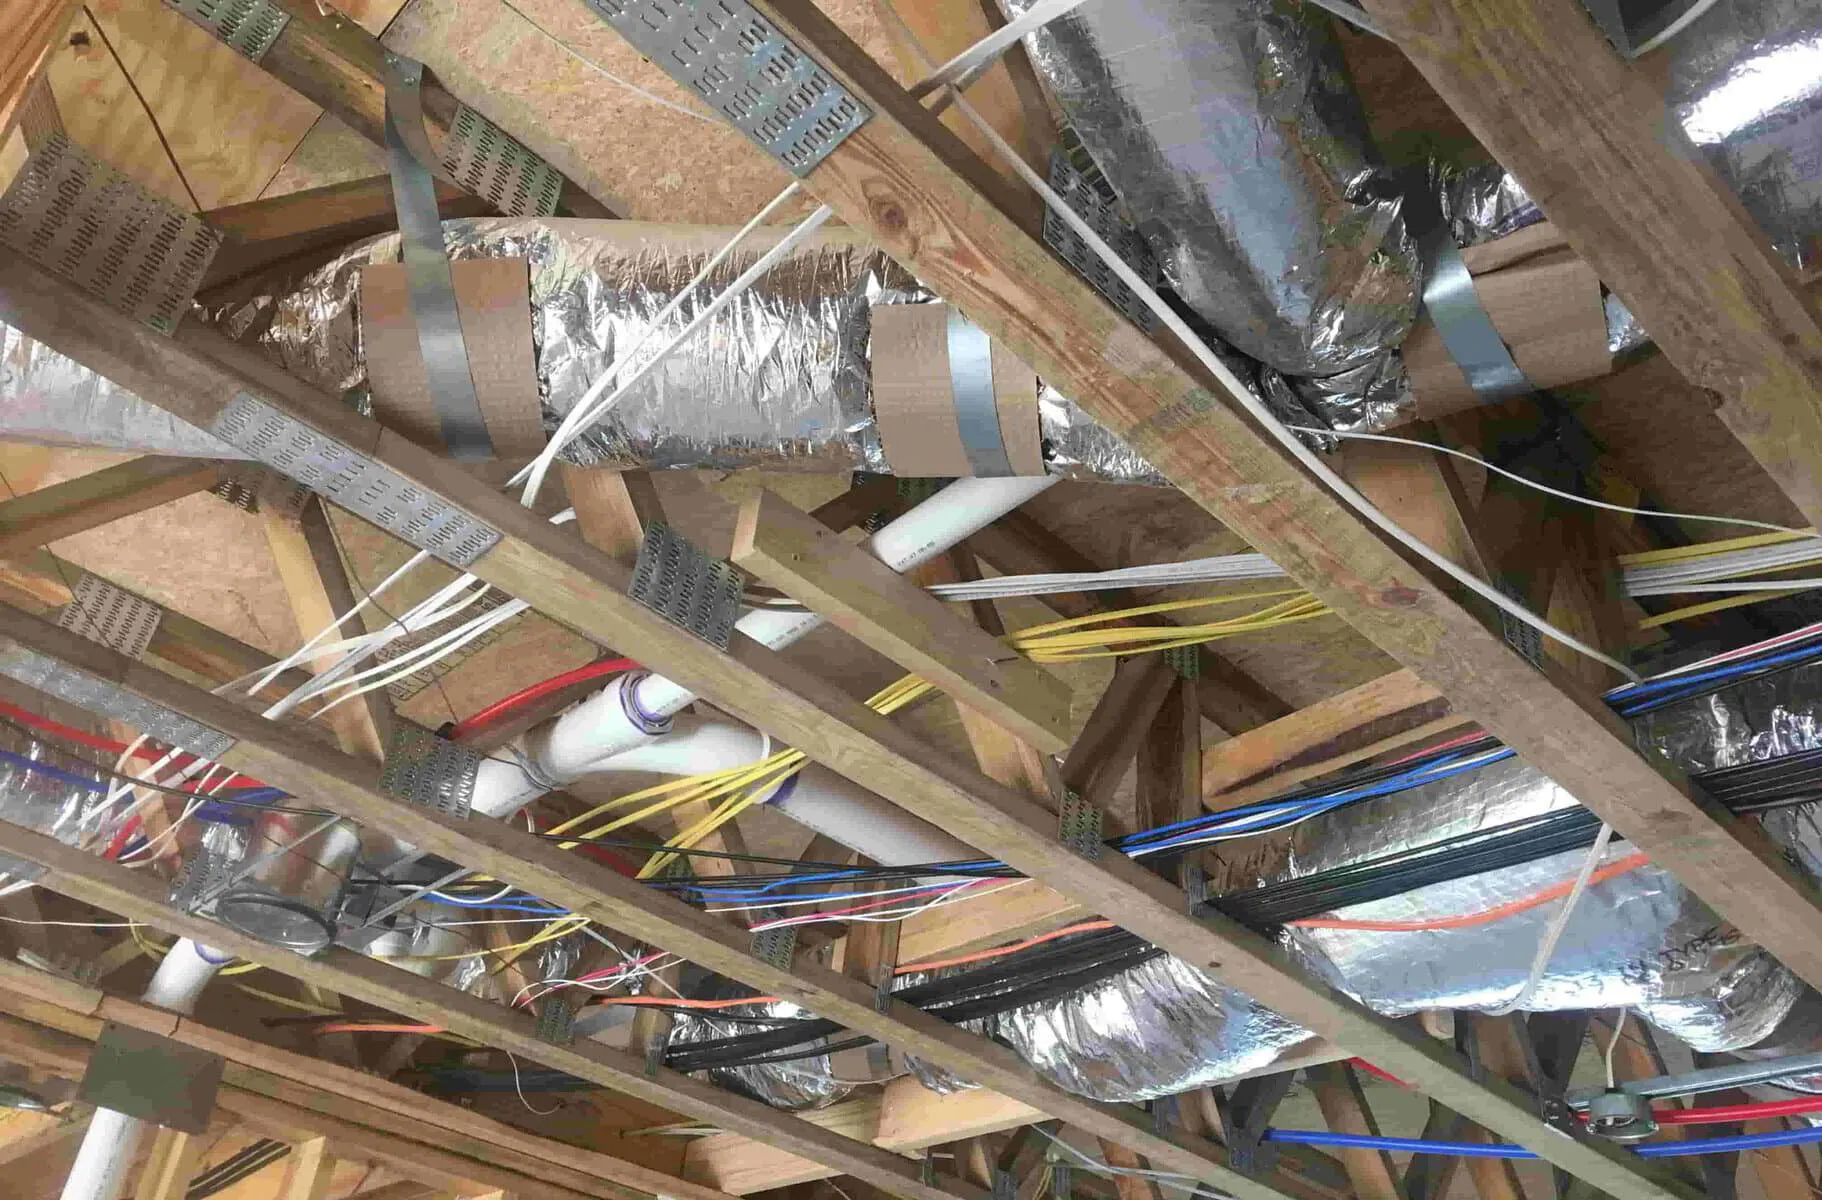 Ducts in attic space